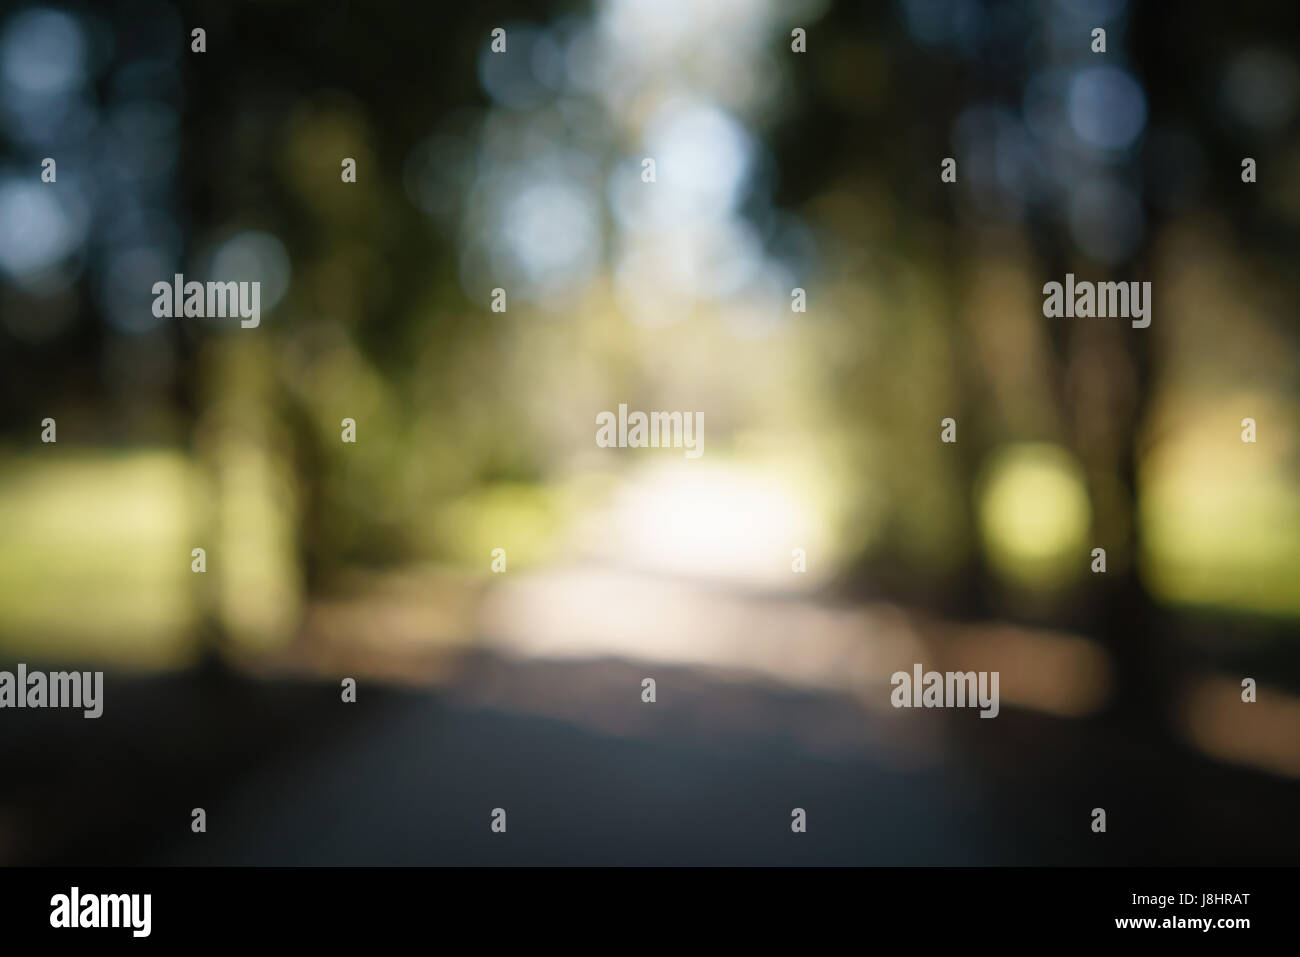 abstract green park or garden blurred background in shadow path Stock Photo